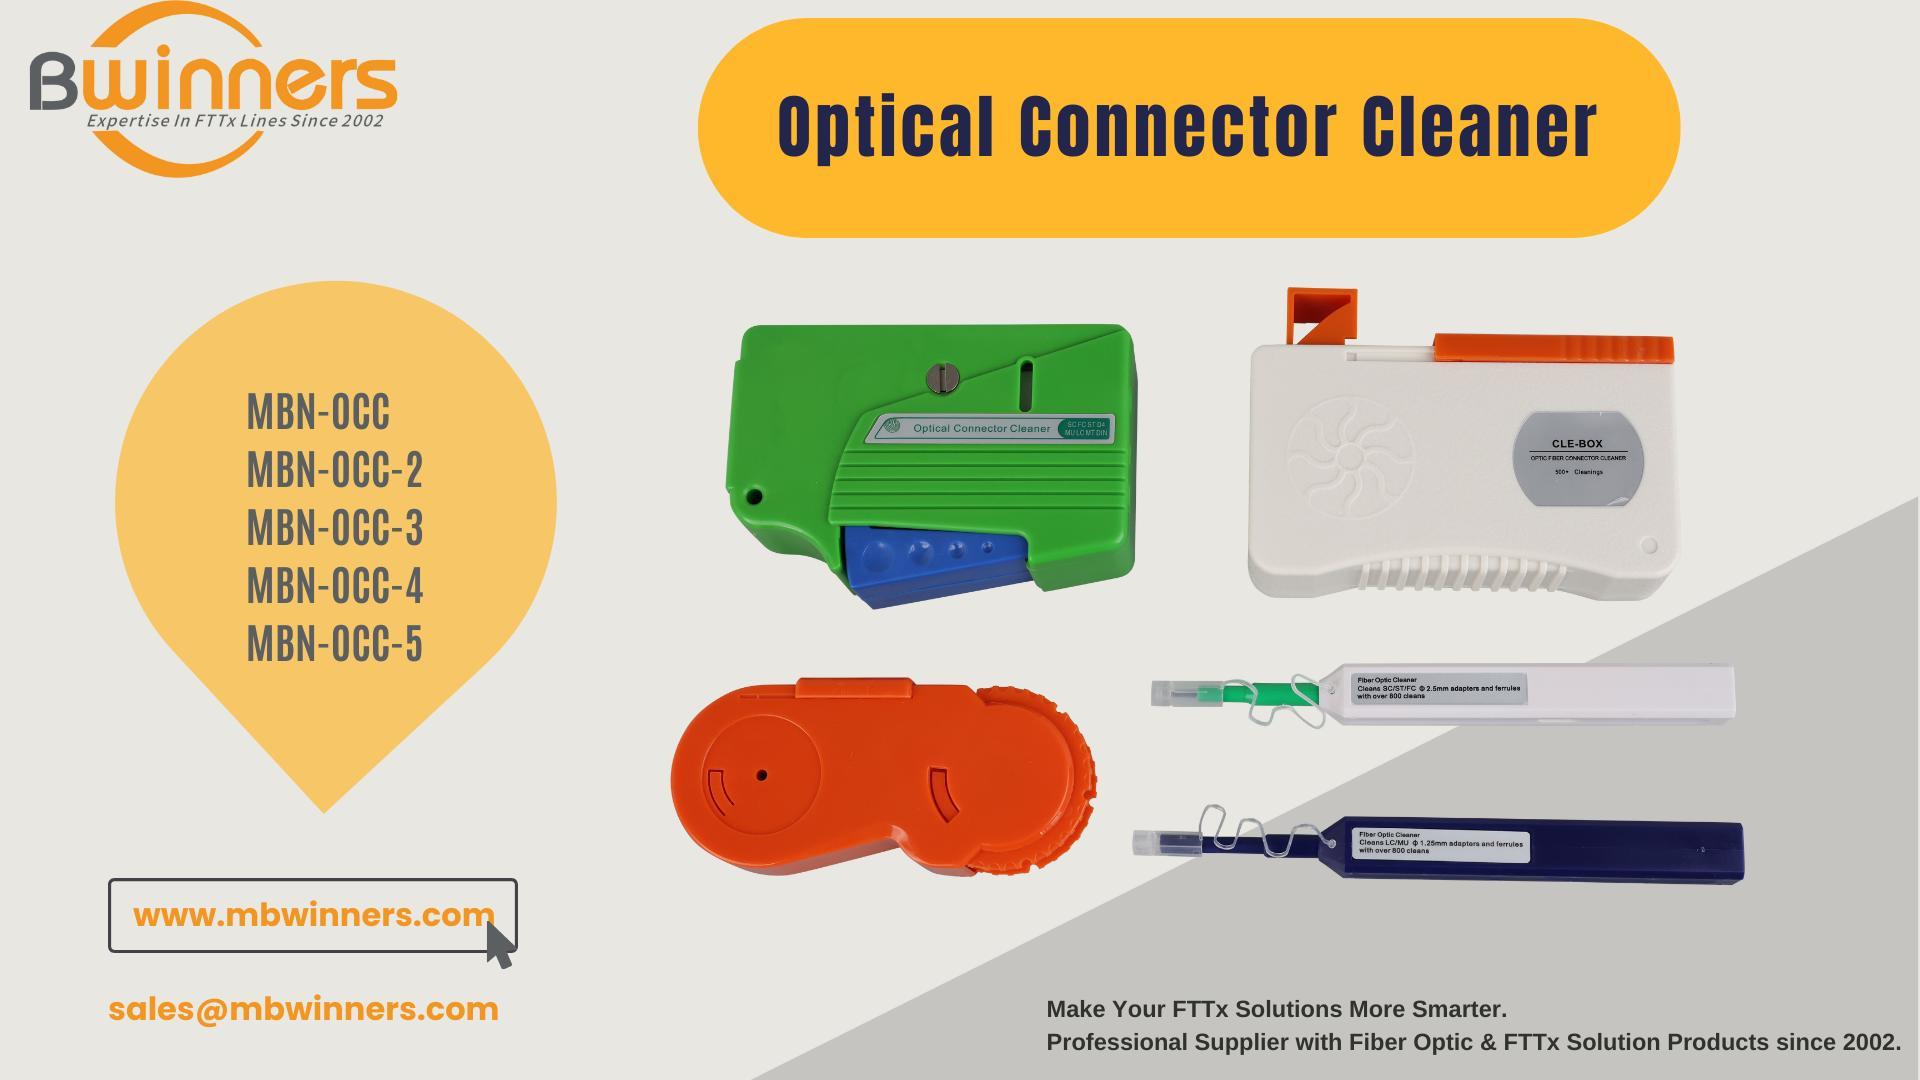 2. Bwinners Optical Connector Cleaner